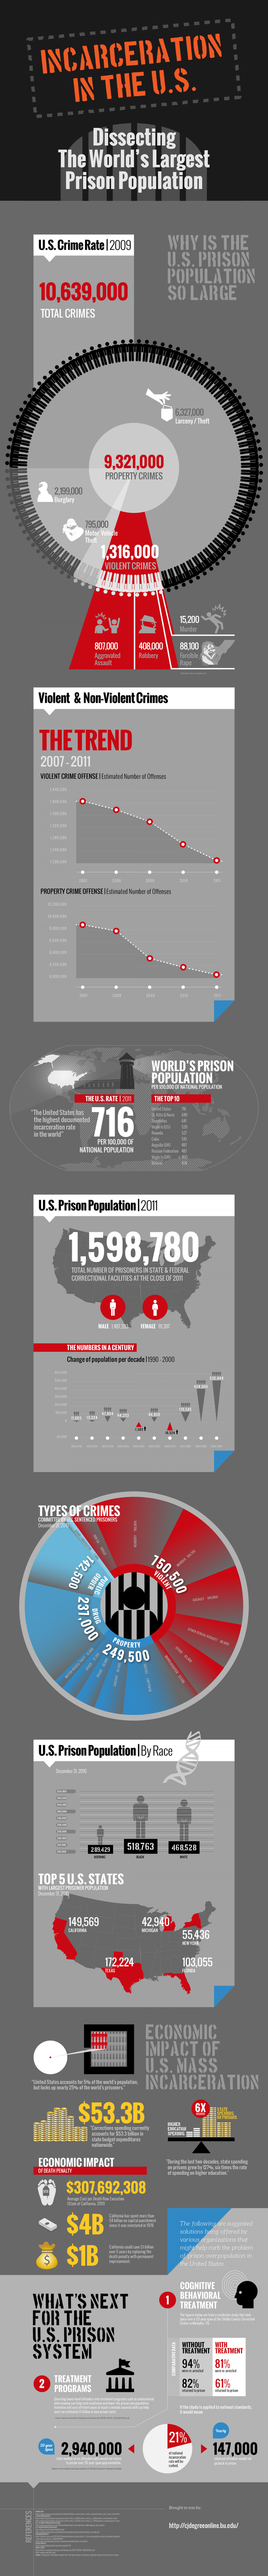 Incarceration in the US: Dissecting the World's Largest Prison Population Infographic